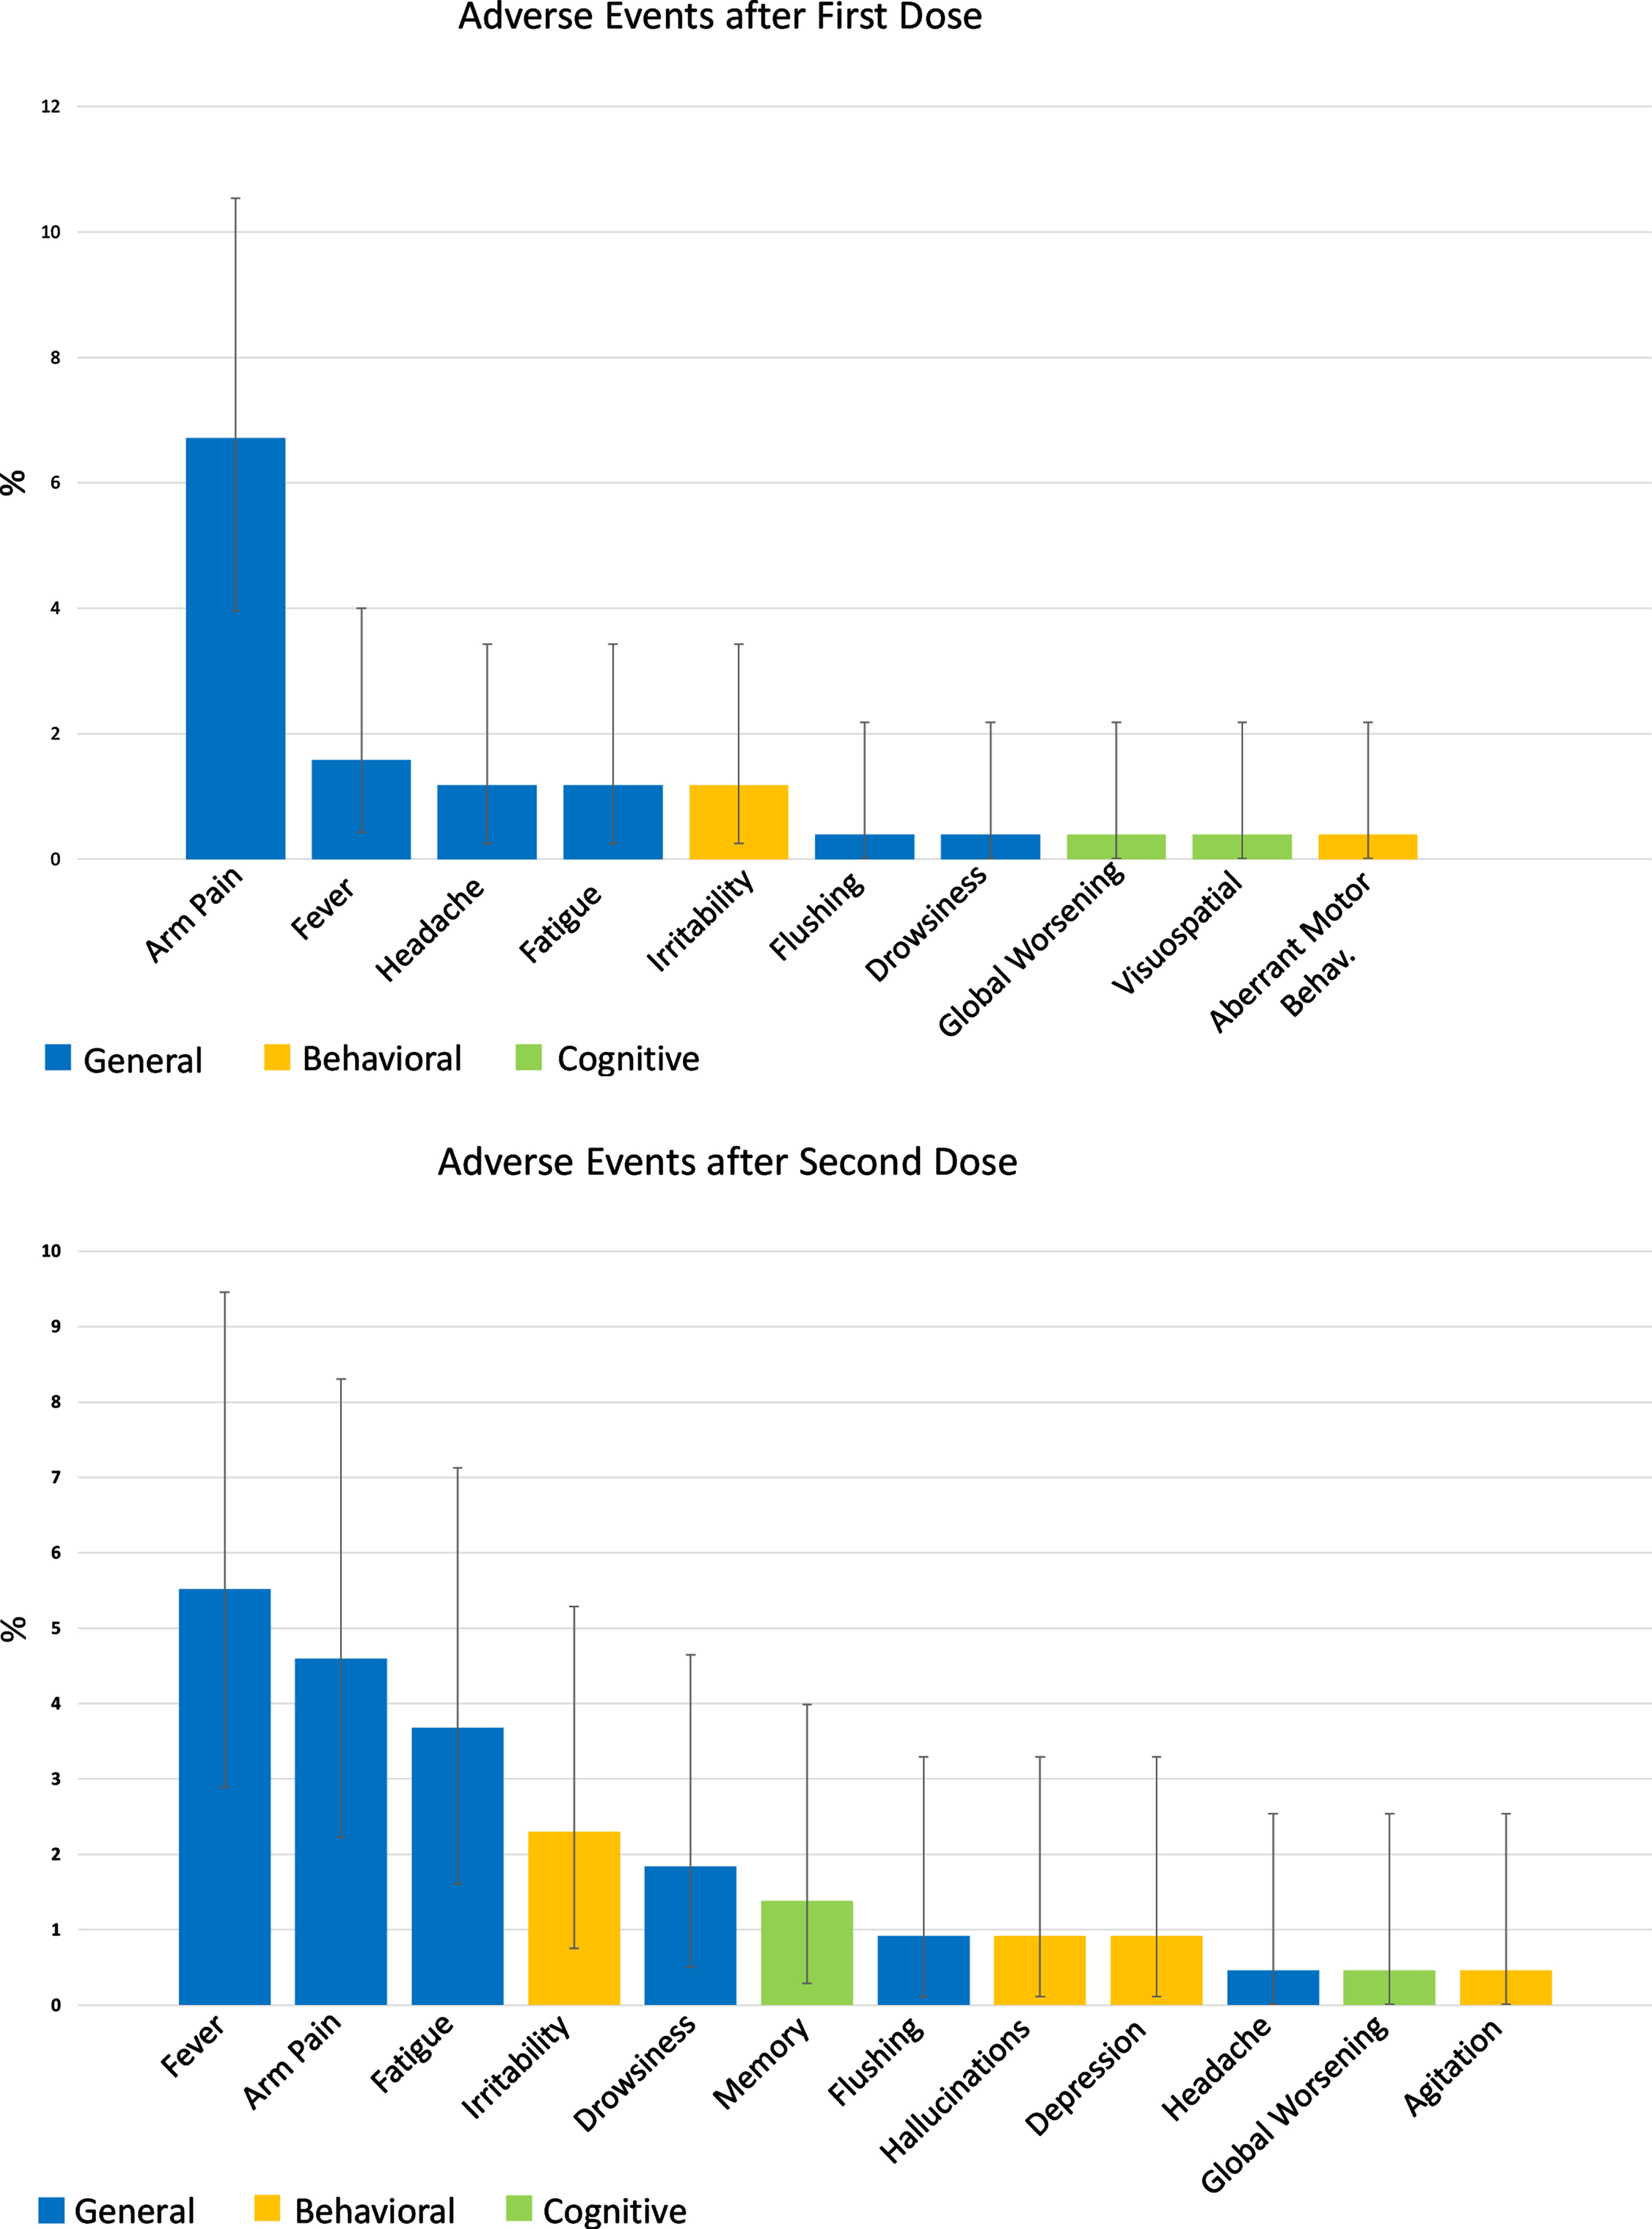 Adverse events after COVID-19 vaccination in the study population. The two bar plots represent the adverse events experienced by patients after the first (253 patients) and second (217 patients) vaccine dose. Data are shown as %.